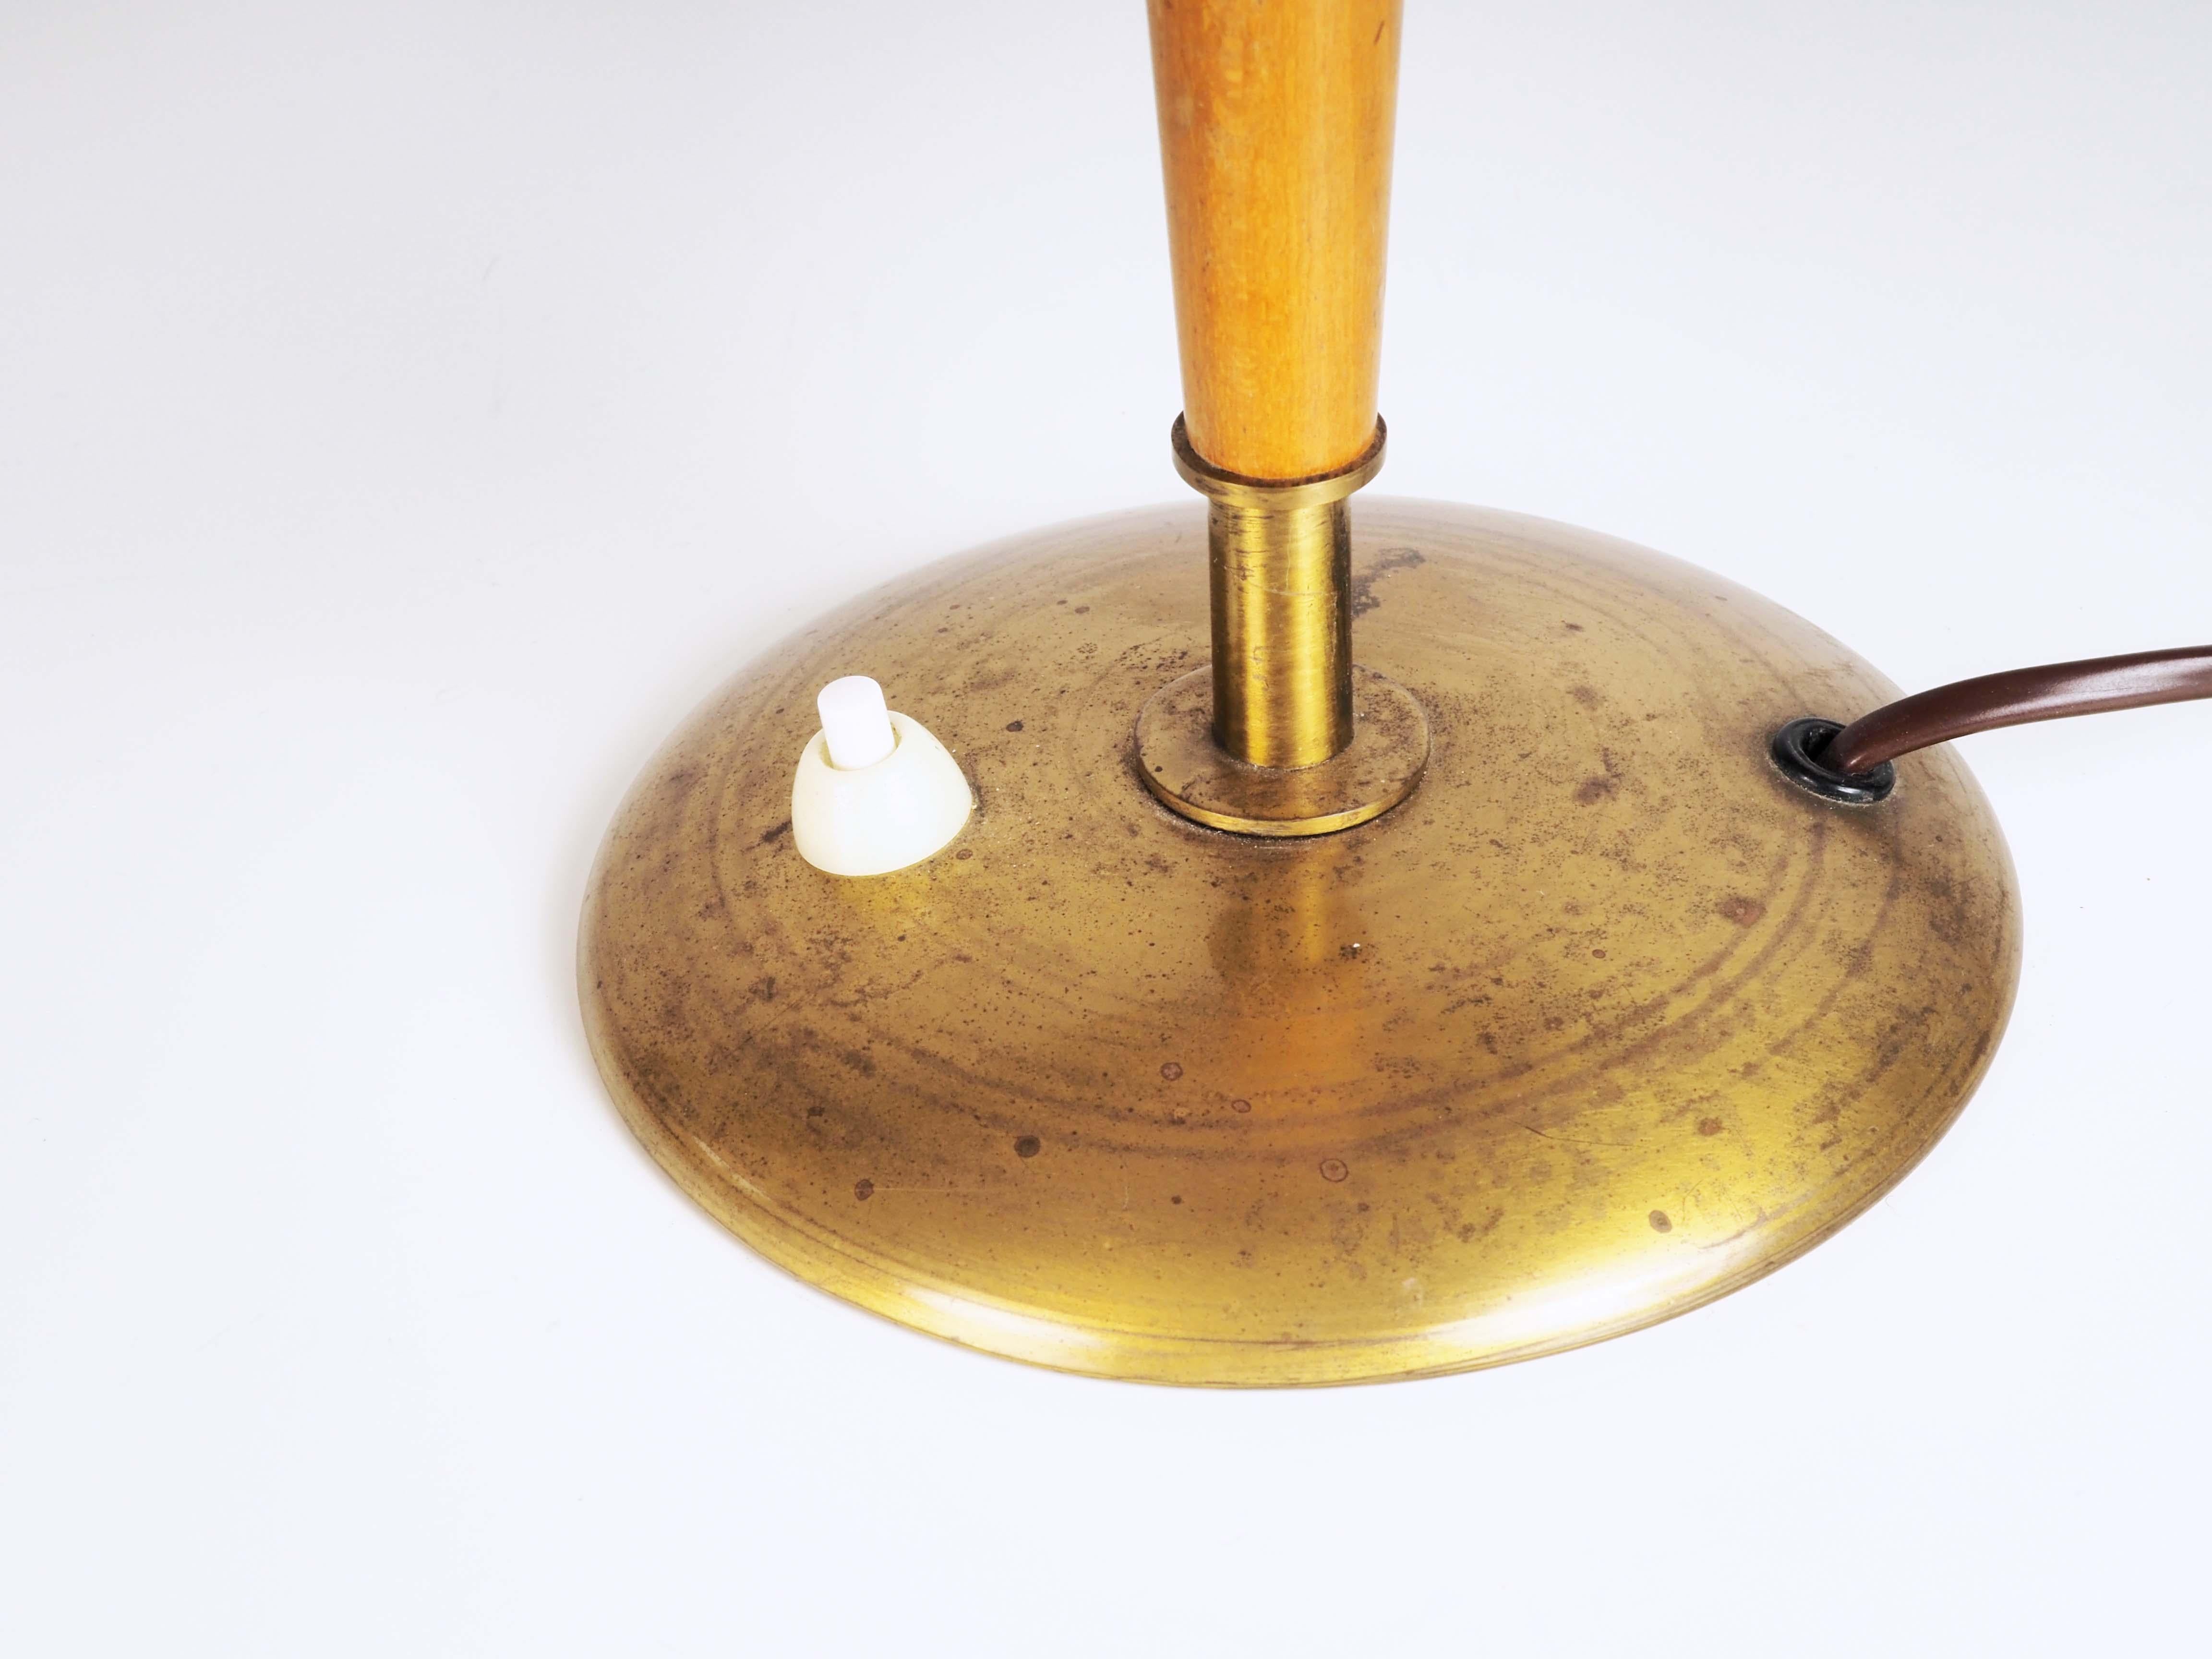 Table lamp in brass and elm. Made in the 1940s by Stockholms leading warehouse, Nordiska Kompaniet, at their own factory in Nyköping, Sweden.